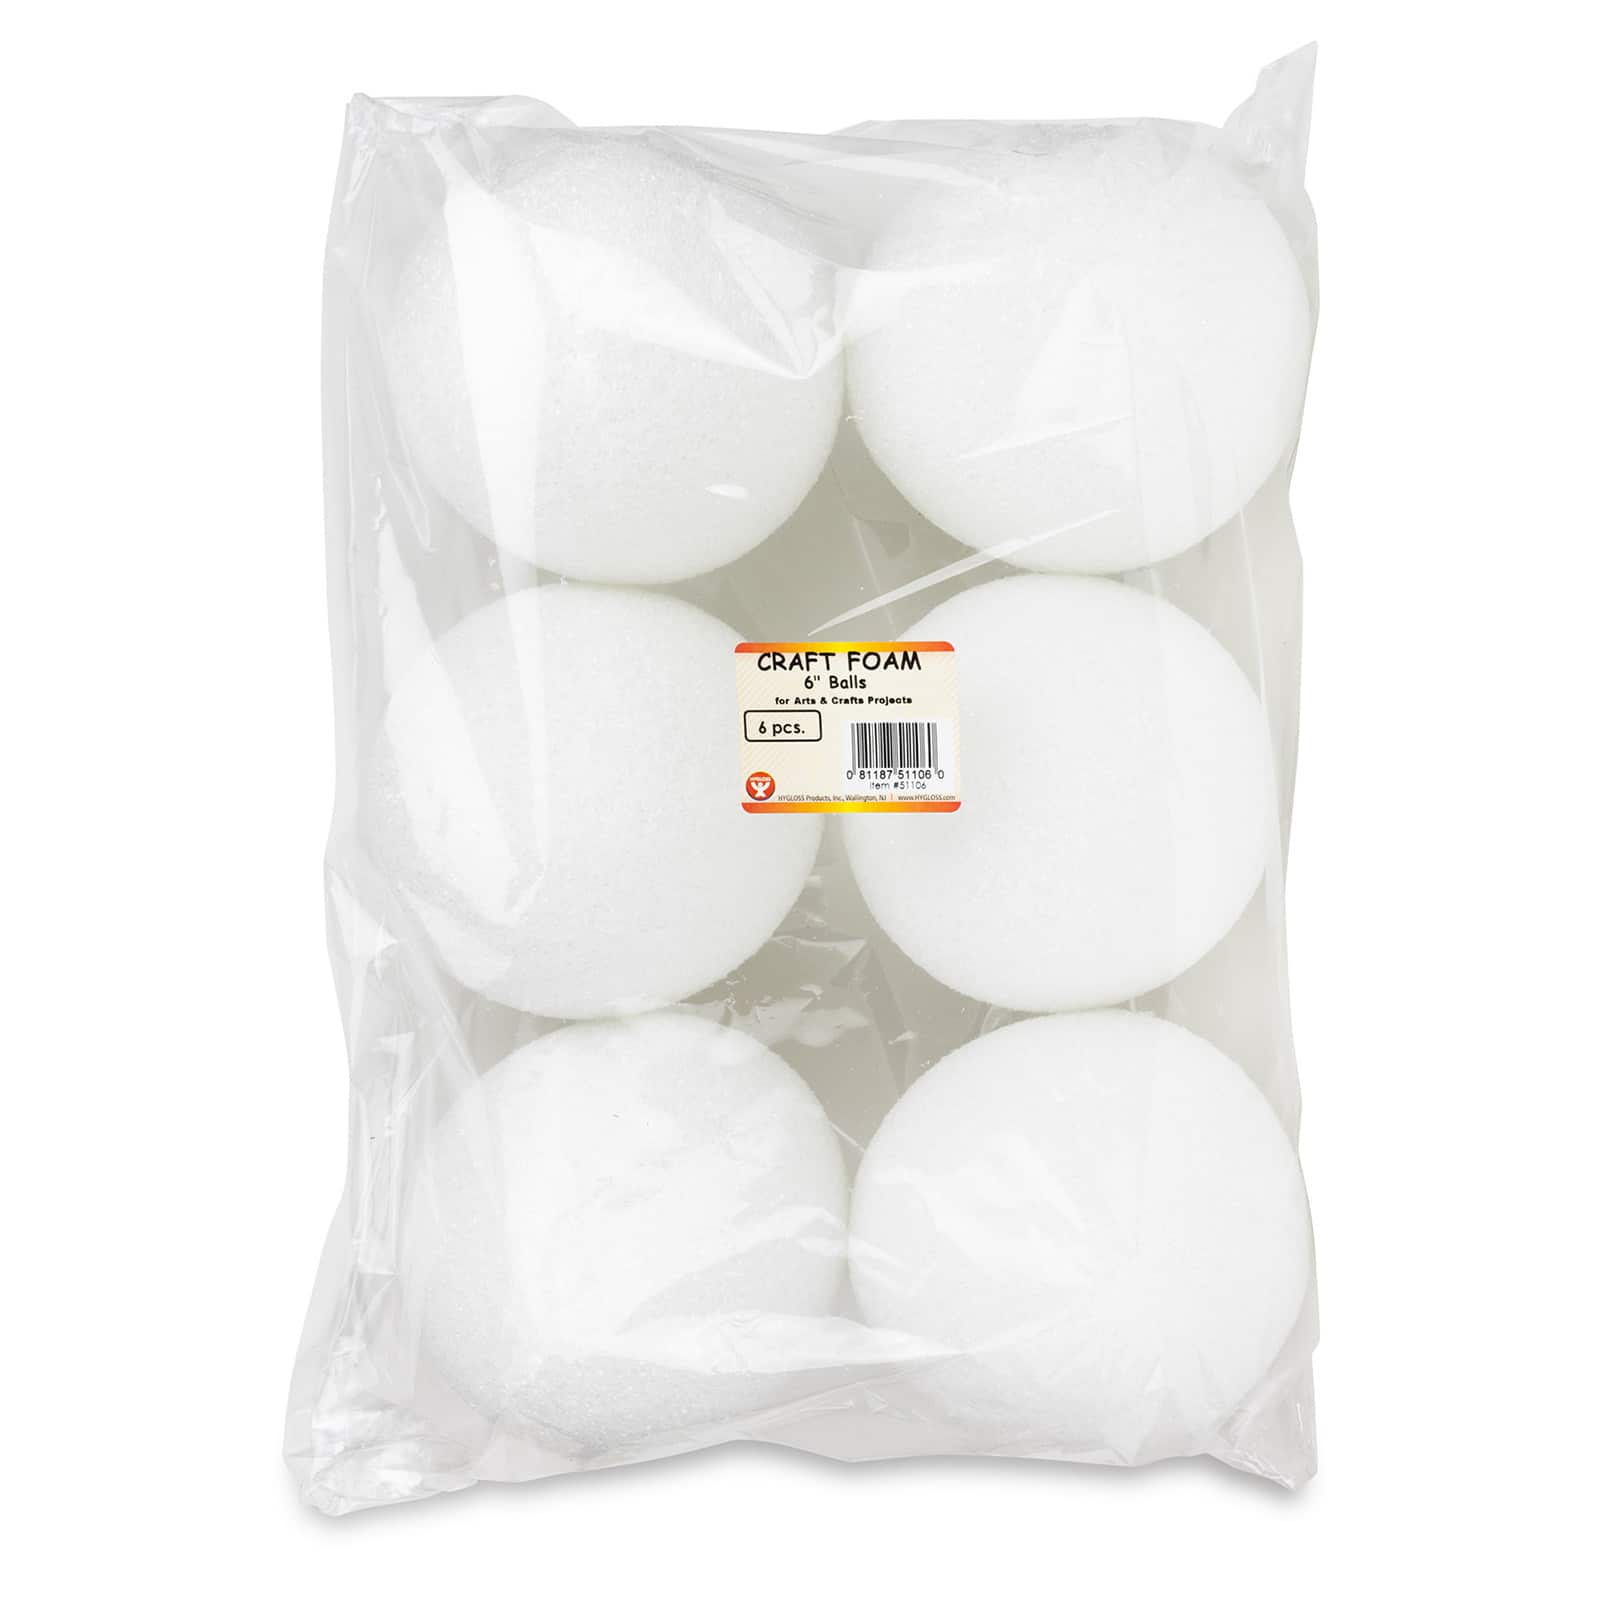 6 Smooth Foam Craft Balls (12 Pack) – LACrafts